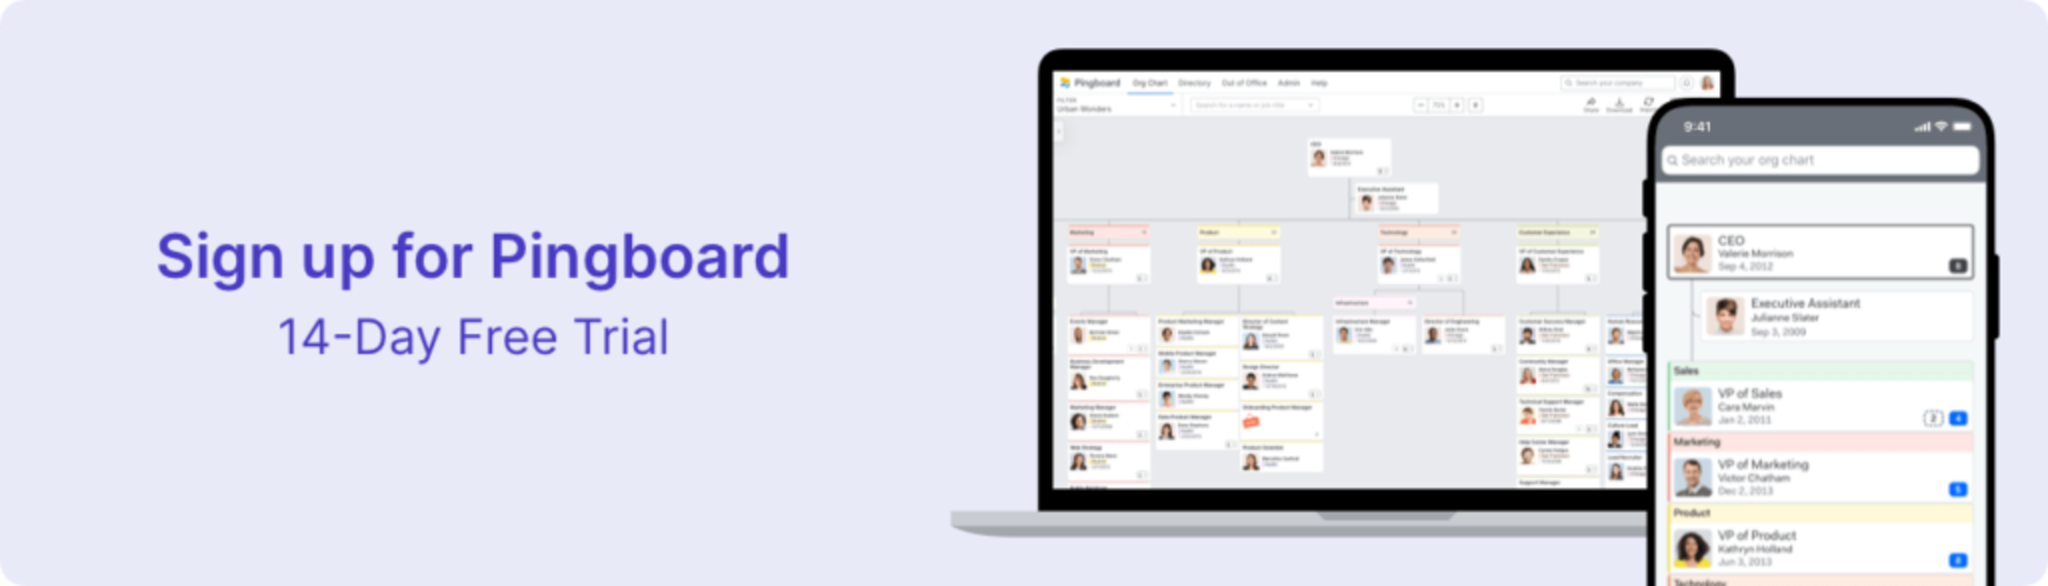 Sign up for Pingboard 14-day free trial